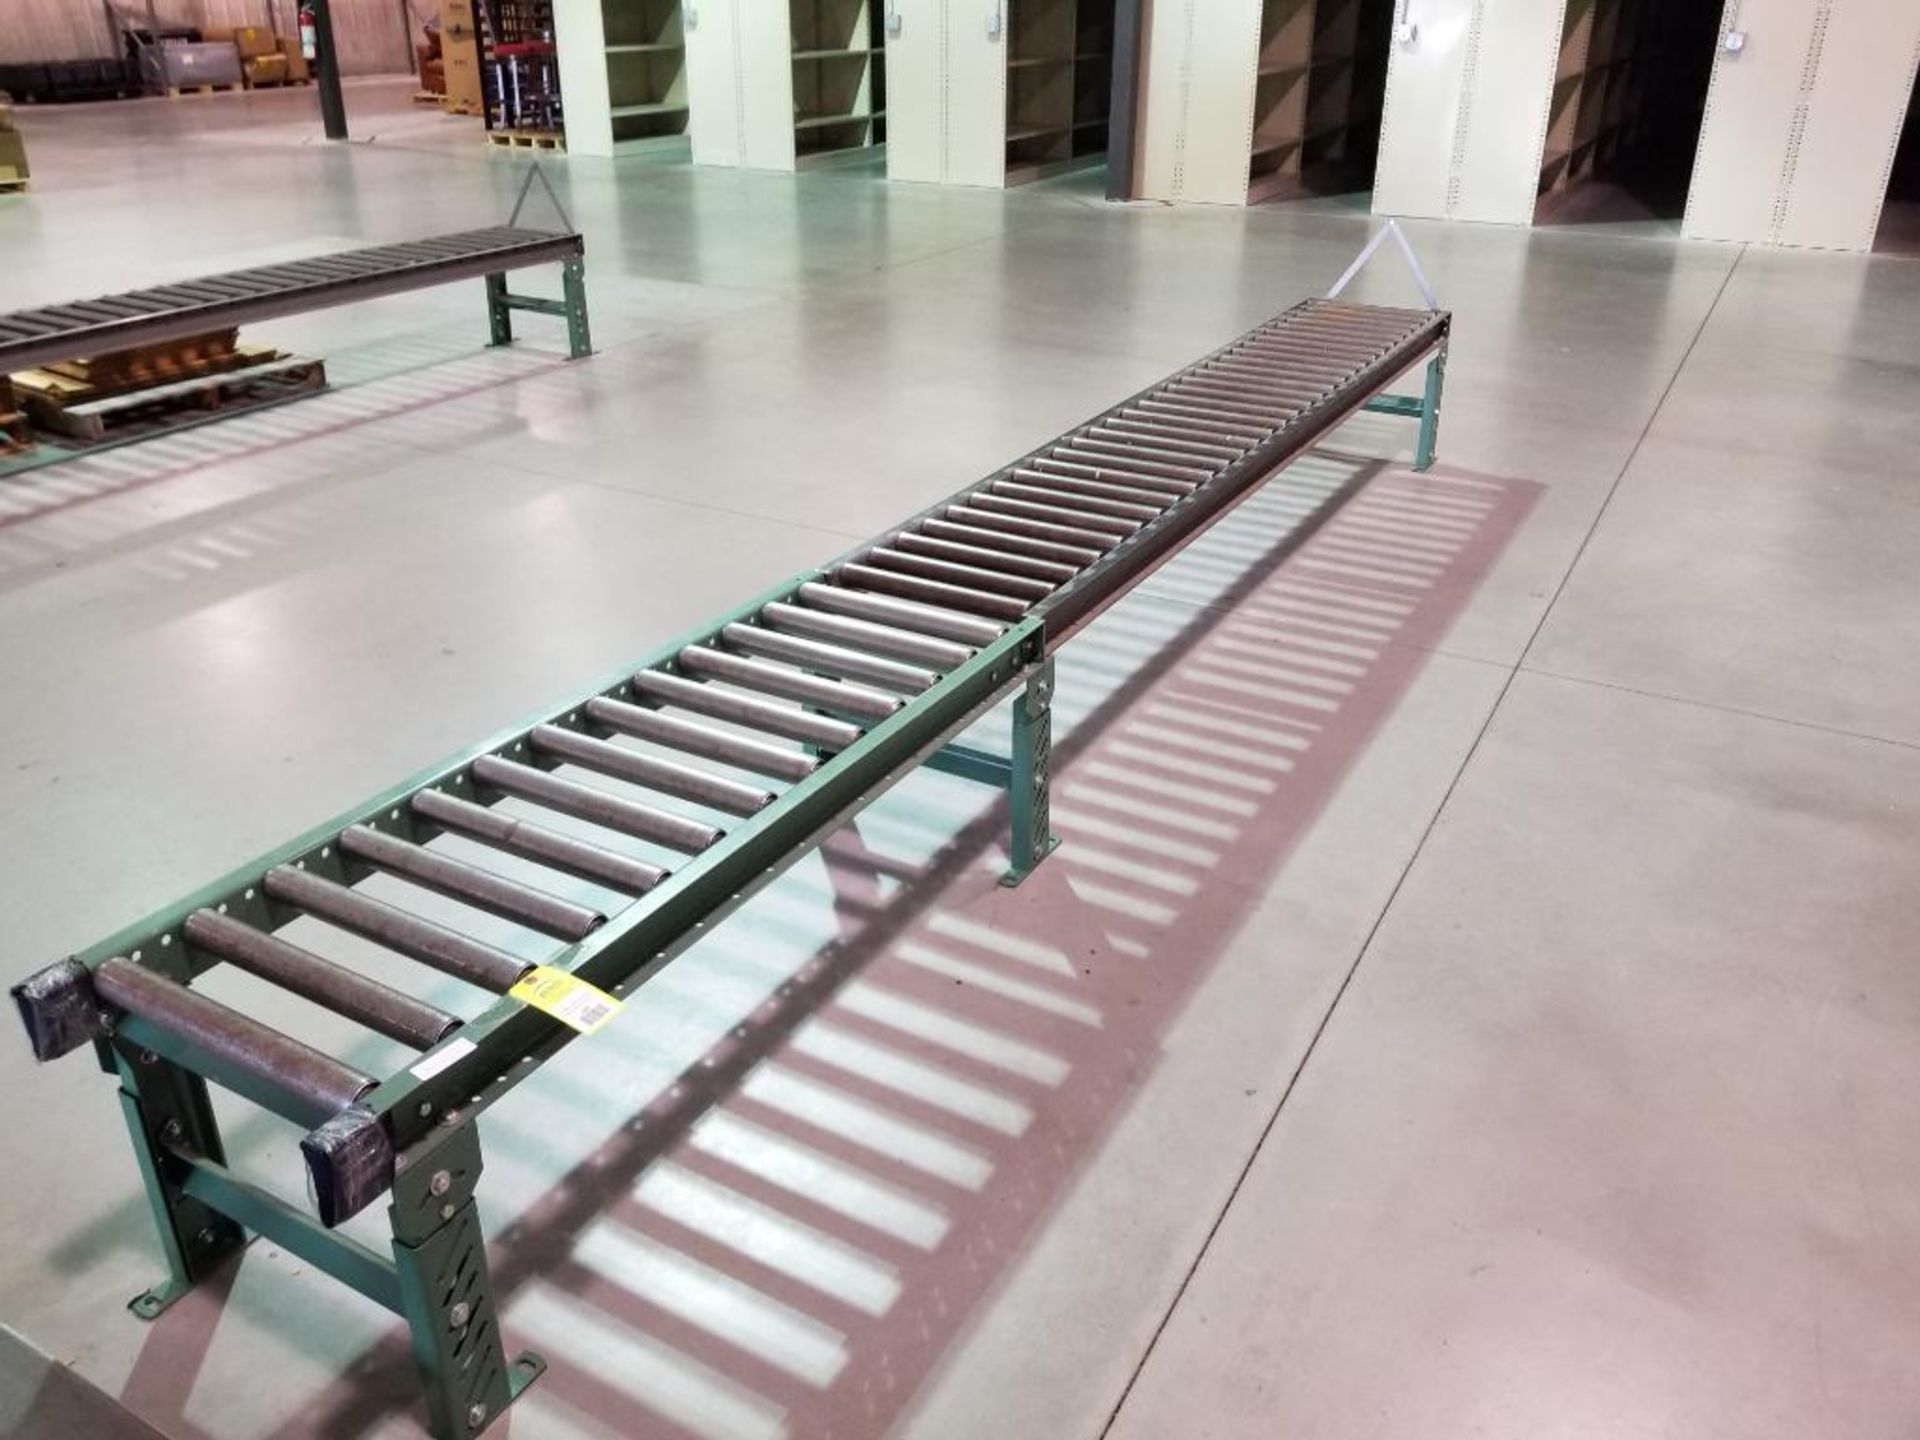 15ft roller conveyor section. 20in wide by 20in tall. (legs are adjustable to change height)